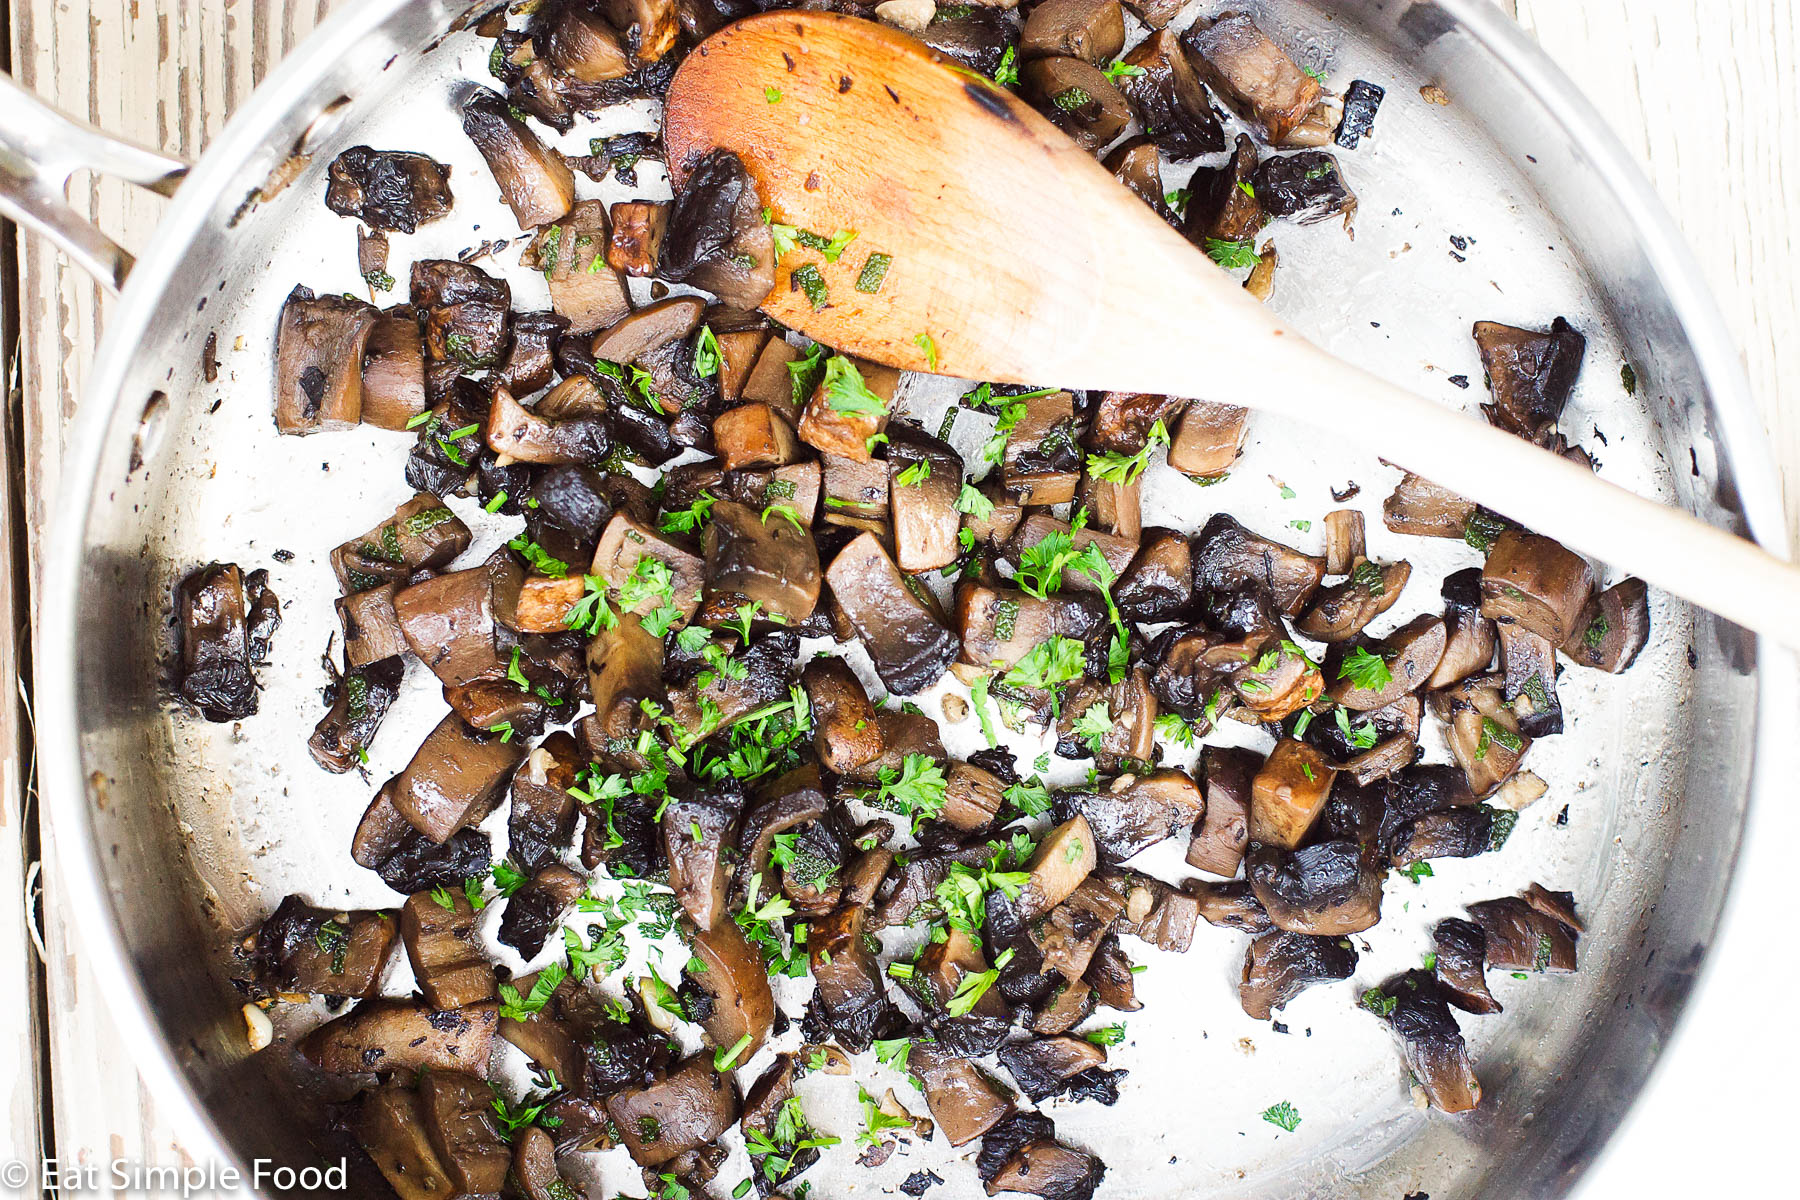 Stainless steel pan full of cooked Portobello Mushrooms with parsley garnish and a wood spoon sticking out of it.